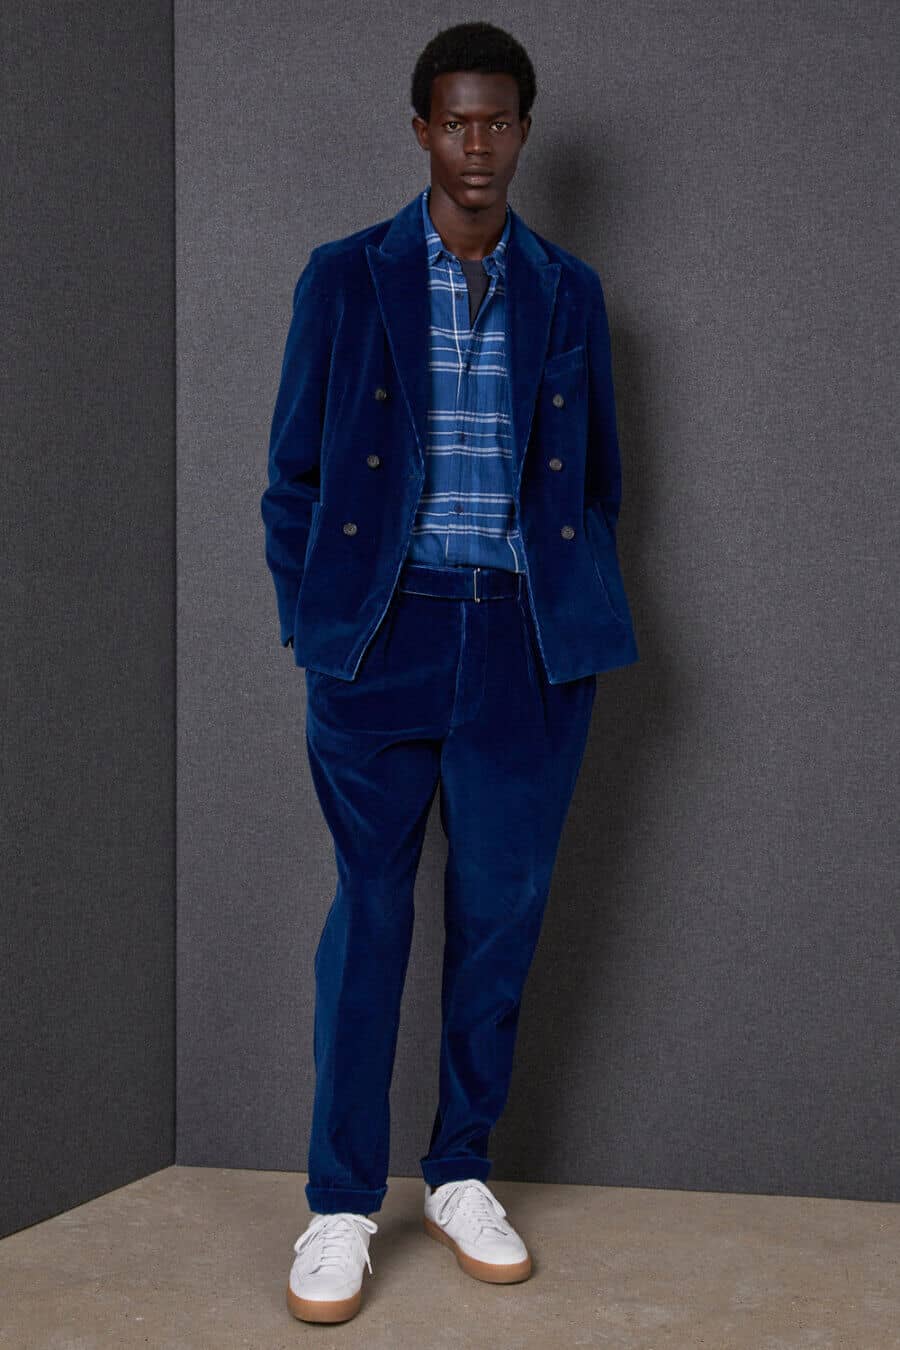 Men's corduroy suit, checked shirt and sneakers outfit